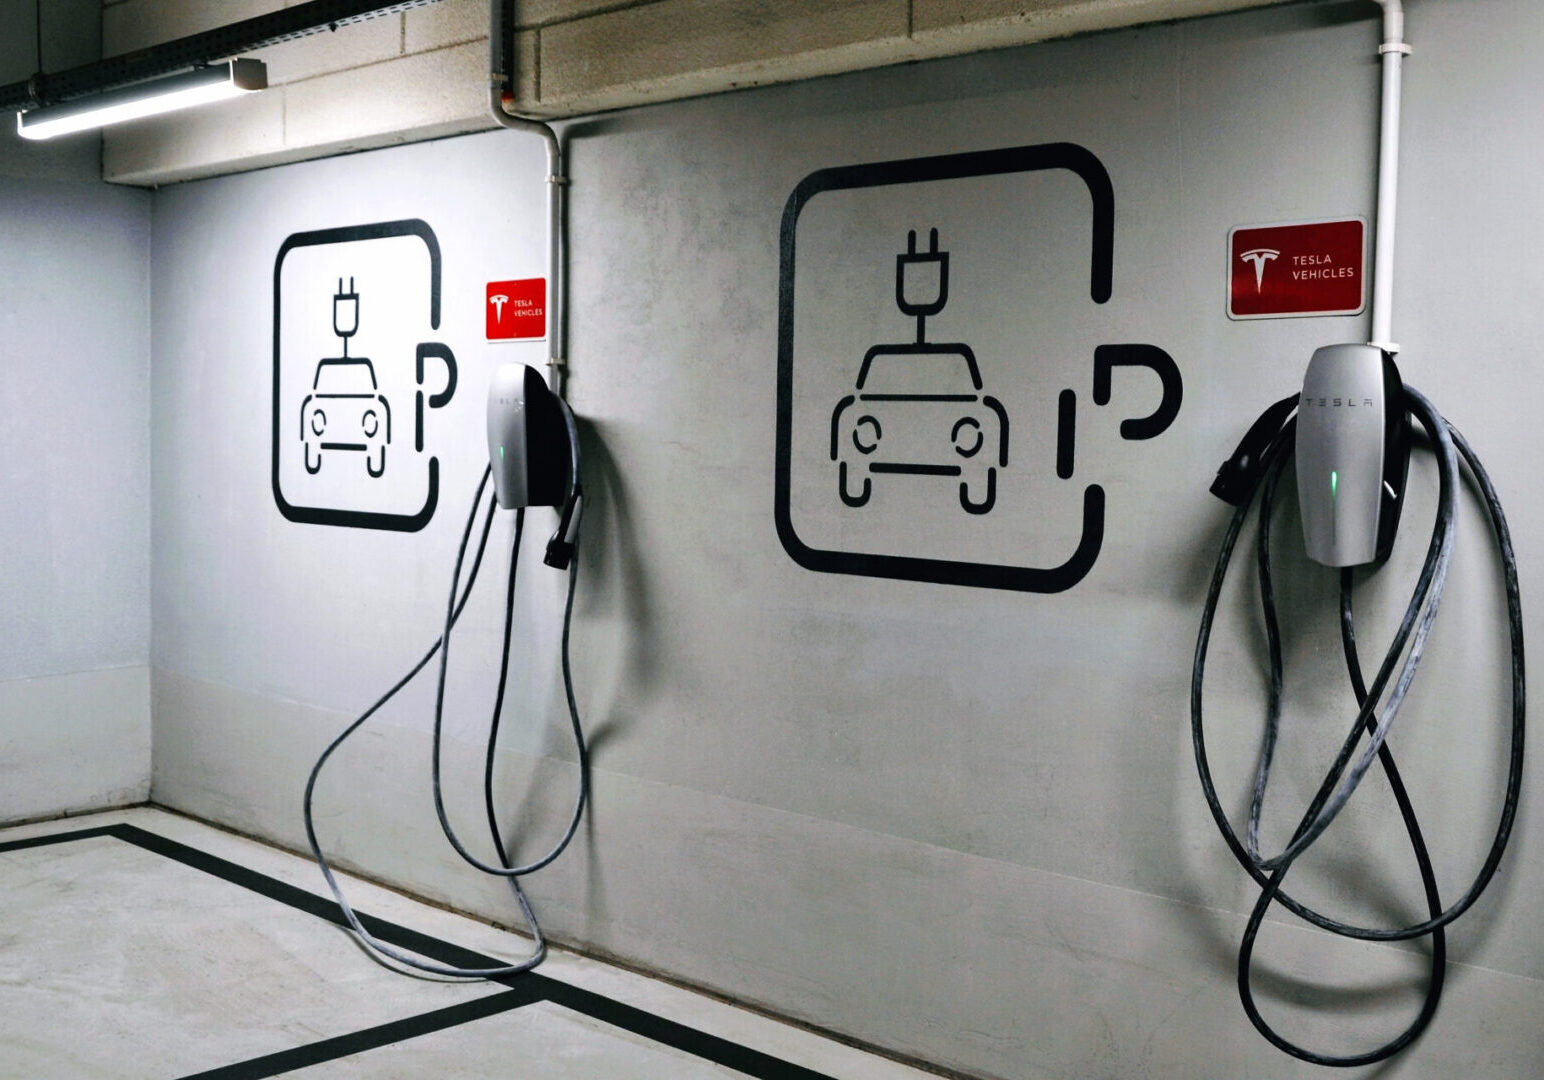 A wall with two electric cars charging on it